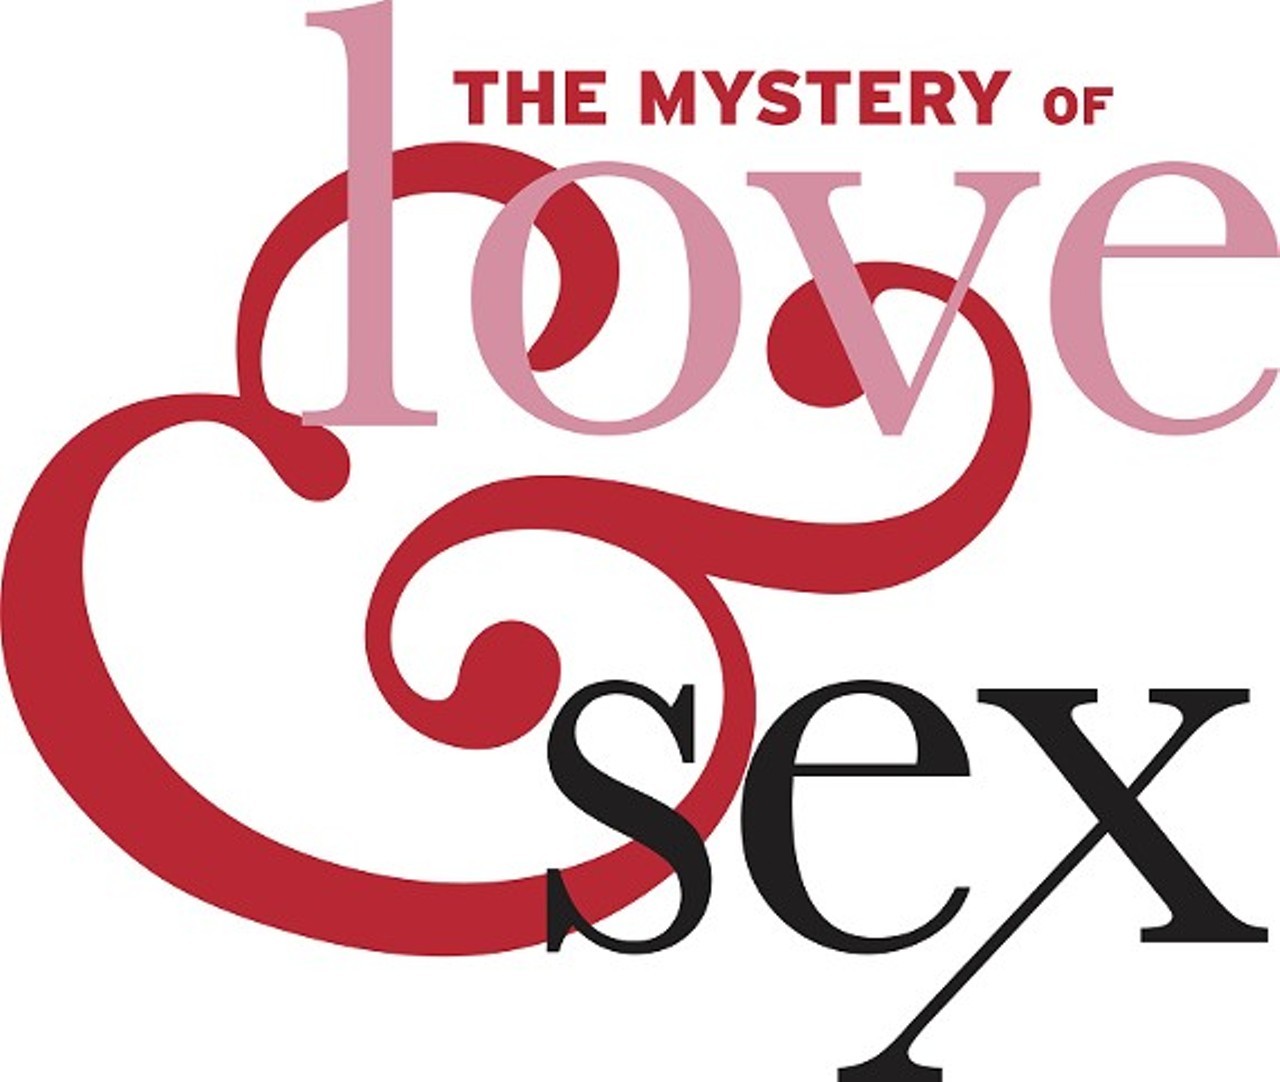 The Mystery of Love and Sex 
When: Fri., Sept. 2, 8-10 p.m., Sat., Sept. 3, 8-10 p.m., Sun., Sept. 4, 7:30-10 p.m., Thu., Sept. 8, 7:30-10 p.m., Fri., Sept. 9, 8-10 p.m., Sat., Sept. 10, 8-10 p.m., Sun., Sept. 11, 2:30-4 p.m., Thu., Sept. 15, 7:30-10 p.m., Fri., Sept. 16, 8-10 p.m., Sat., Sept. 17, 8-10 p.m., Sun., Sept. 18, 2:30-4 p.m., Thu., Sept. 22, 7:30-10 p.m., Fri., Sept. 23, 8-10 p.m., Sat., Sept. 24, 8-10 p.m., Sun., Sept. 25, 2:30-4 p.m., Thu., Sept. 29, 7:30-10 p.m., Fri., Sept. 30, 8-10 p.m., Sat., Oct. 1, 8-10 p.m. and Sun., Oct. 2, 2:30-4 p.m. 
Phone: 216-932-3396 
Email: boxoffice@dobama.org 
Price: $10-32 
www.dobama.org
*MIDWEST PREMIERE* 2016 Lambda Literary Award Finalist Written By Bathsheba Doran Directed by Shannon Sindelar Featuring: Wesley Allen+, Heather Anderson Boll*, Tess Burgler+, and Scott Miller* *Member of Actors&#146; Equity Association +Equity Membership Candidate Charlotte and Jonny have been best friends since they were nine. She&#146;s Jewish, he&#146;s Christian, he&#146;s black, she&#146;s white. Their differences intensify their connection until sex and love complicate everything in surprising, compulsive ways. Spanning five years, Bathsheba Doran&#146;s (KIN) new play is full of compassion and wry wisdom. Full of twists and turns, this is a love story about the consequences of growing up.